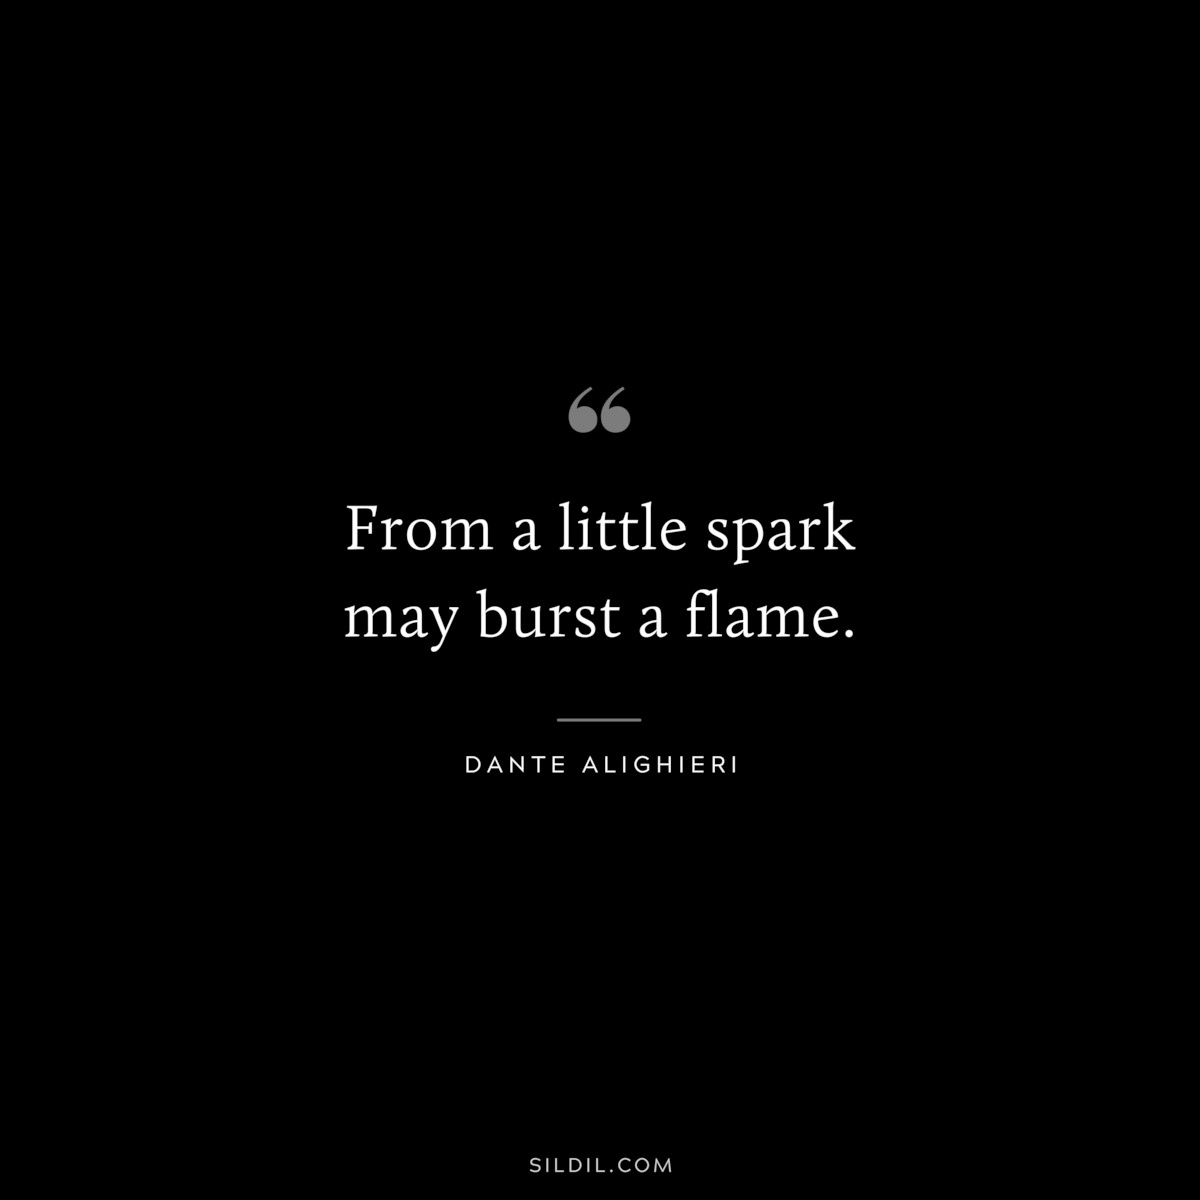 From a little spark may burst a flame. ― Dante Alighieri